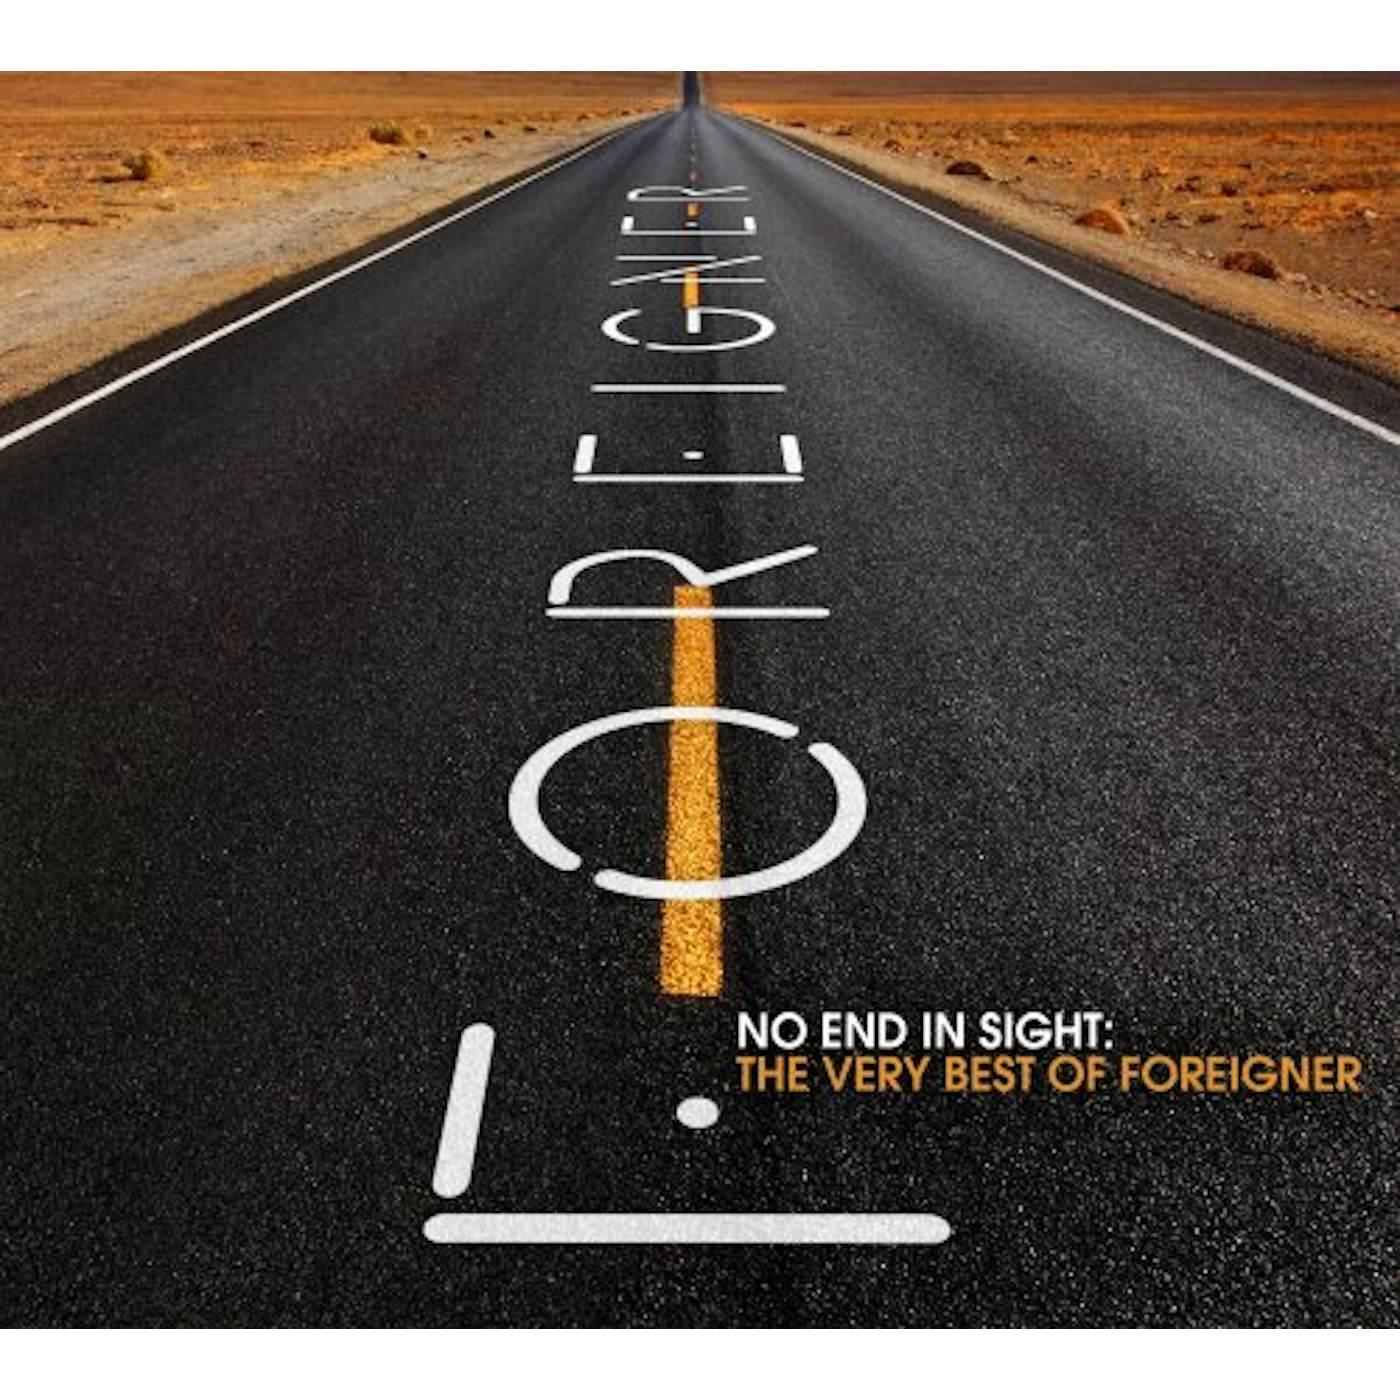 NO END IN SIGHT: THE VERY BEST OF FOREIGNER CD